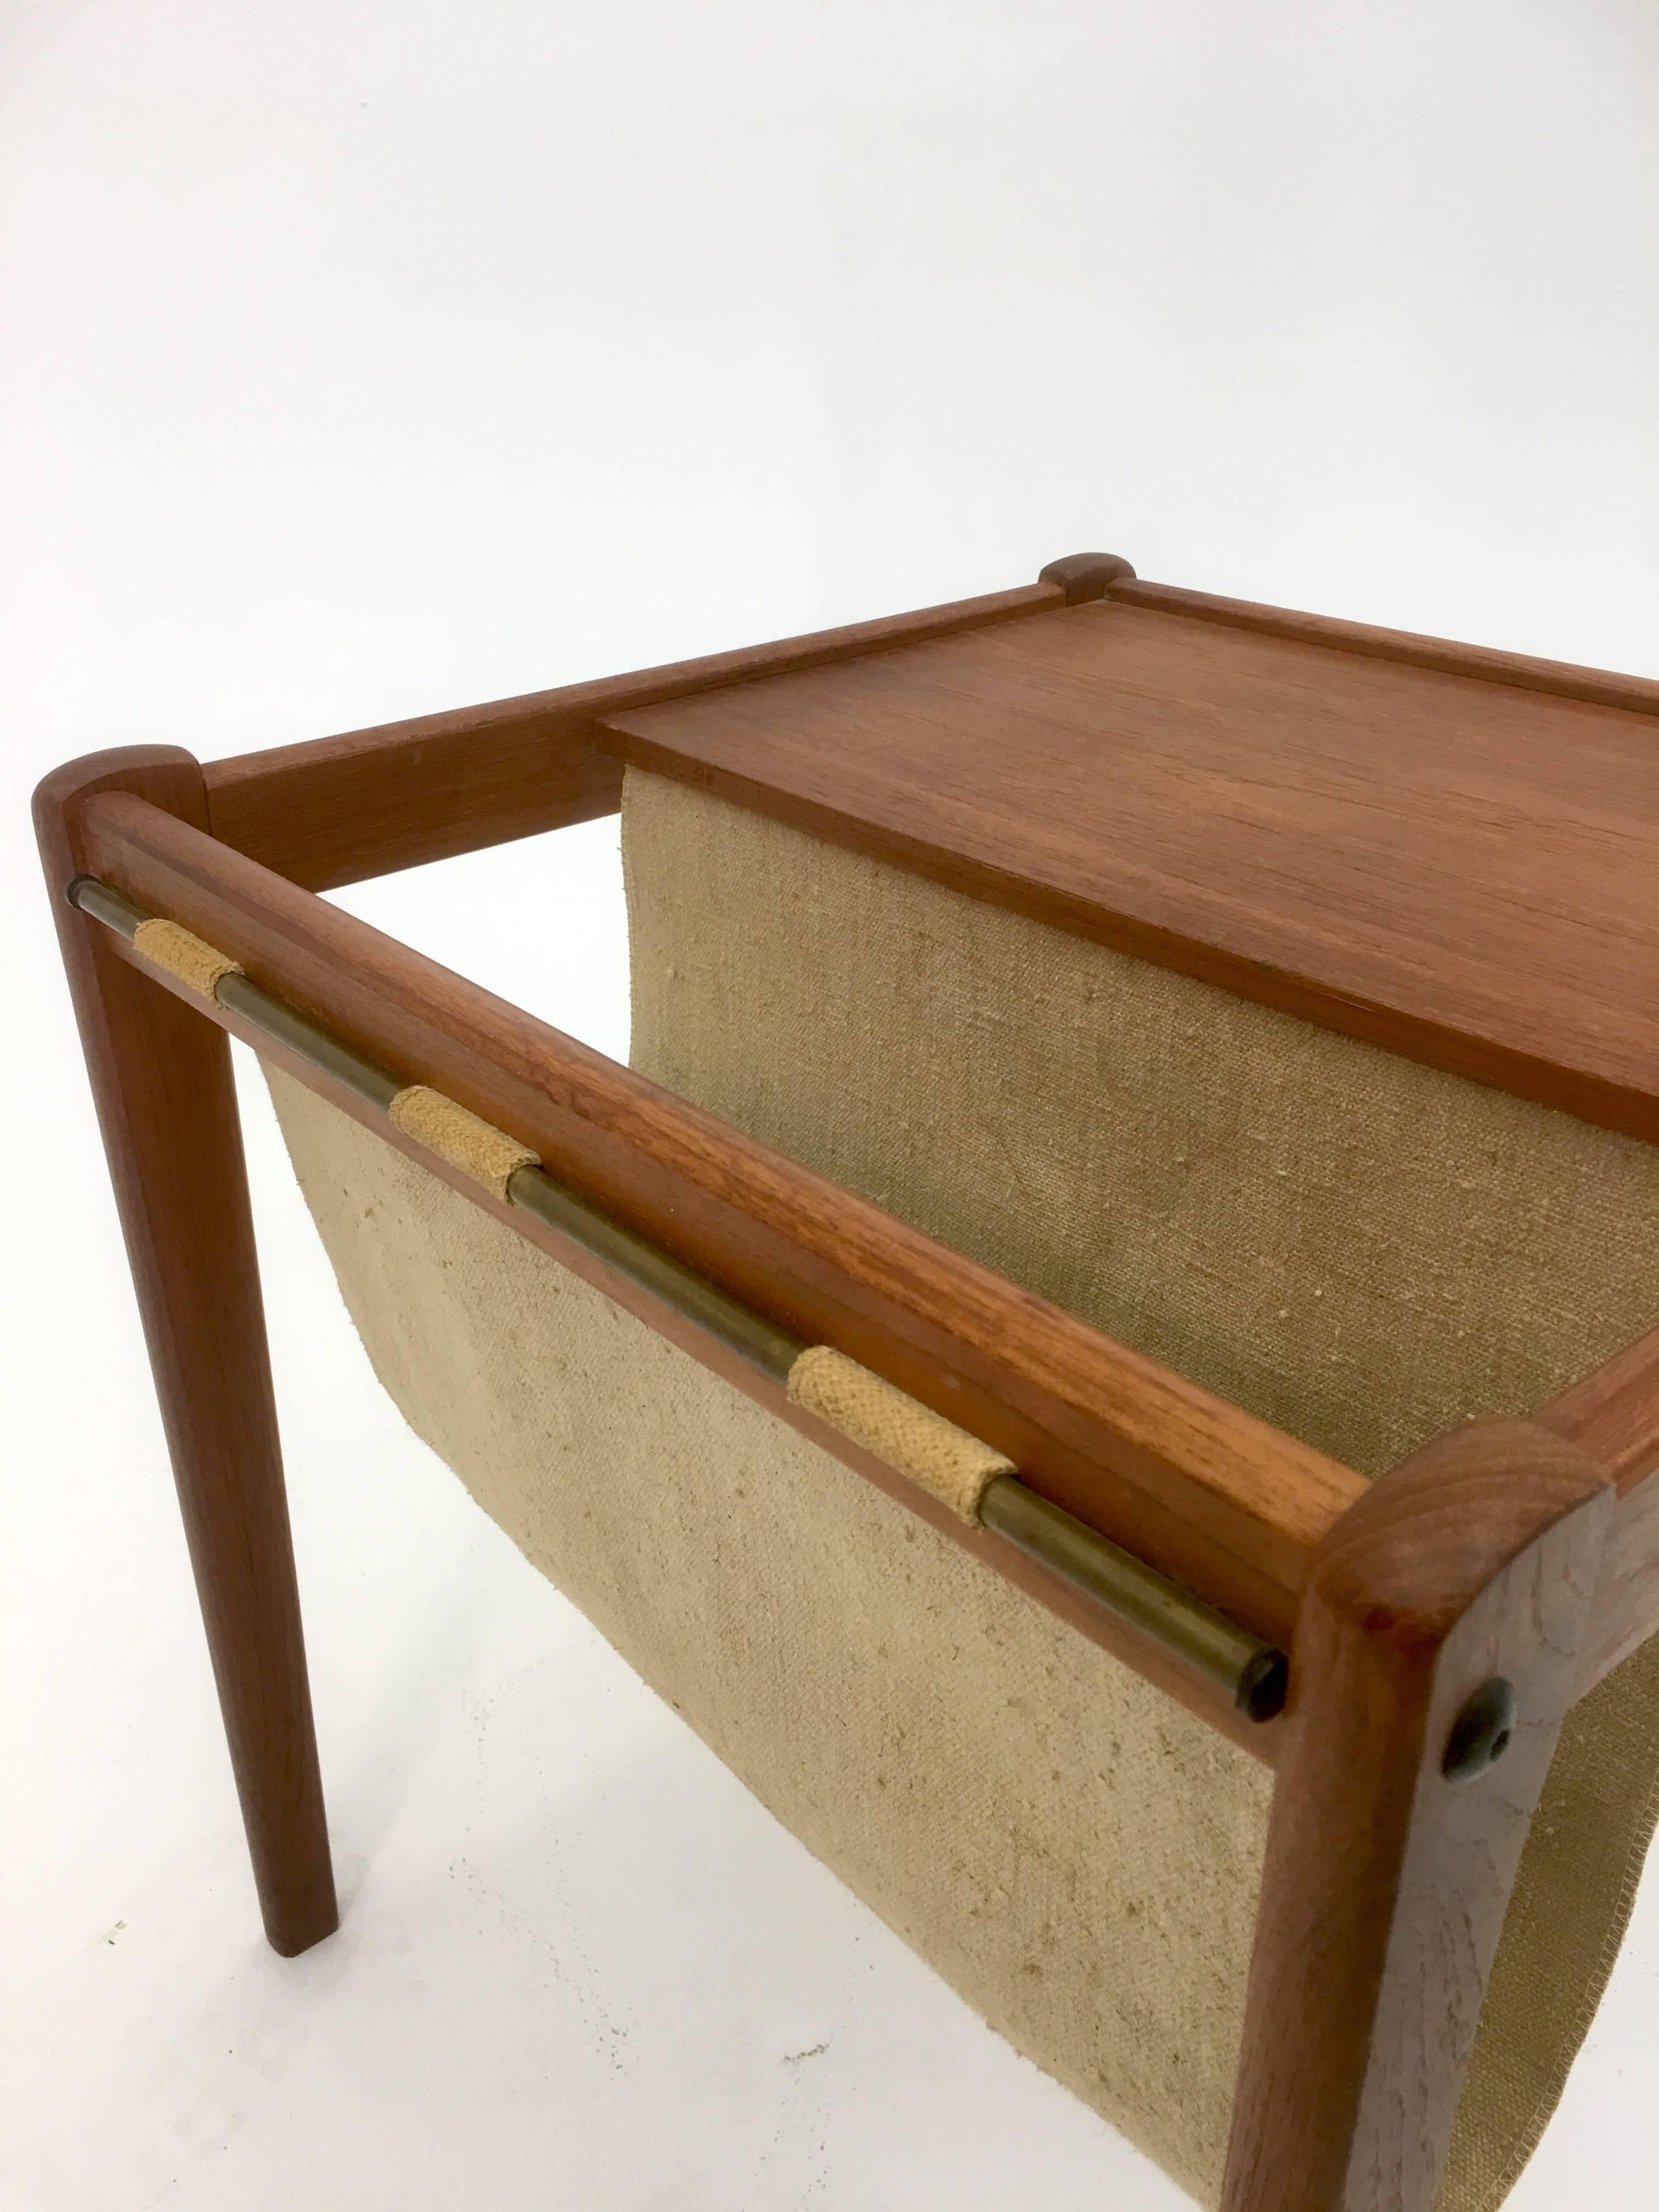 Made in Denmark by the company BRDR Furbo Stottrup, circa 1965. Solid teak construction with Danish canvas used in a sling form to hold magazines and other articles. 

A bras bar holds the canvas in place. Perfect for a hallway or when a table is